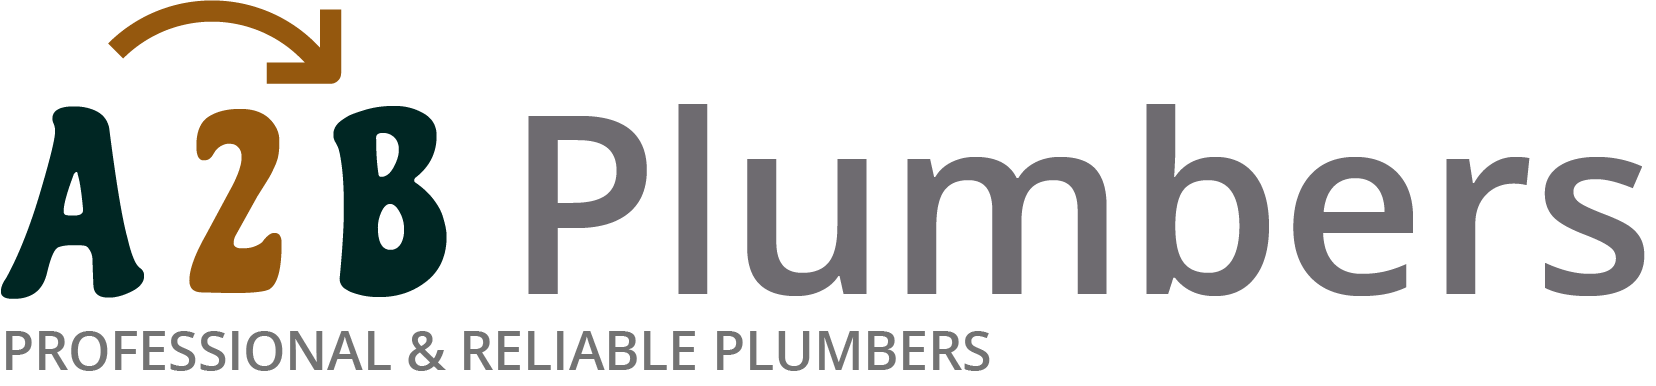 If you need a boiler installed, a radiator repaired or a leaking tap fixed, call us now - we provide services for properties in Poplar and the local area.